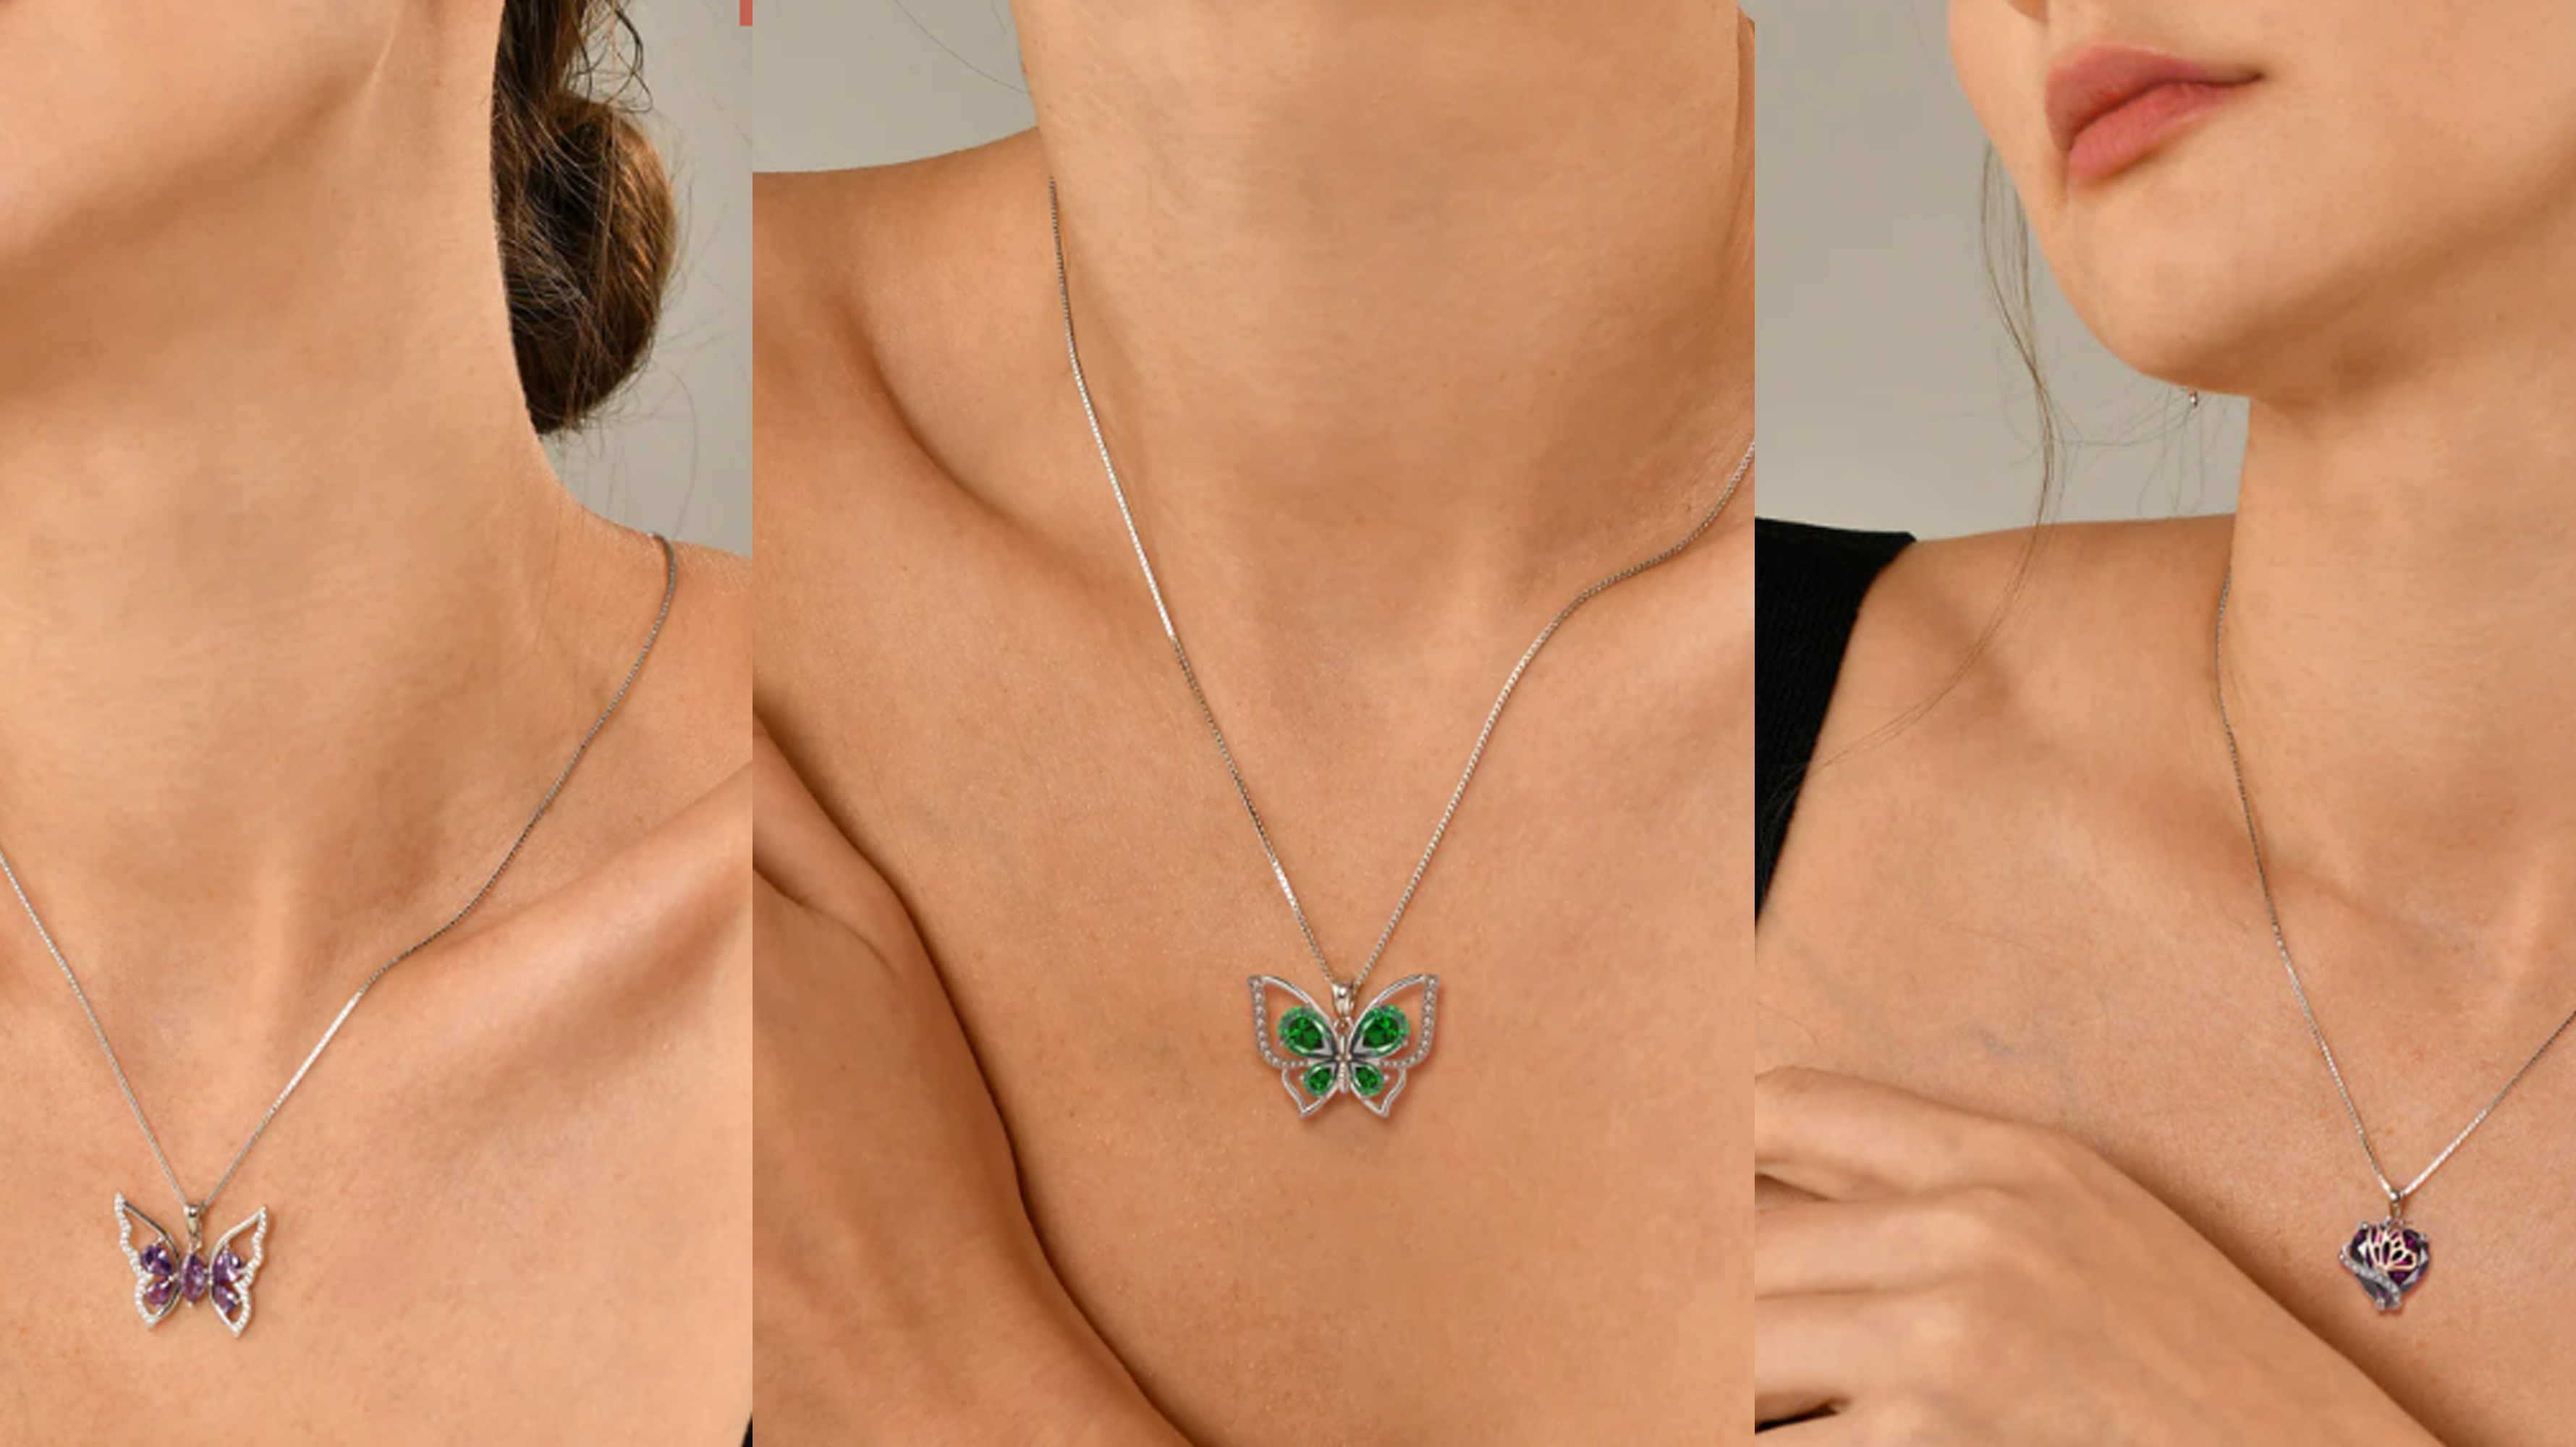 The Charming Butterfly Necklace I Would like to Recommend